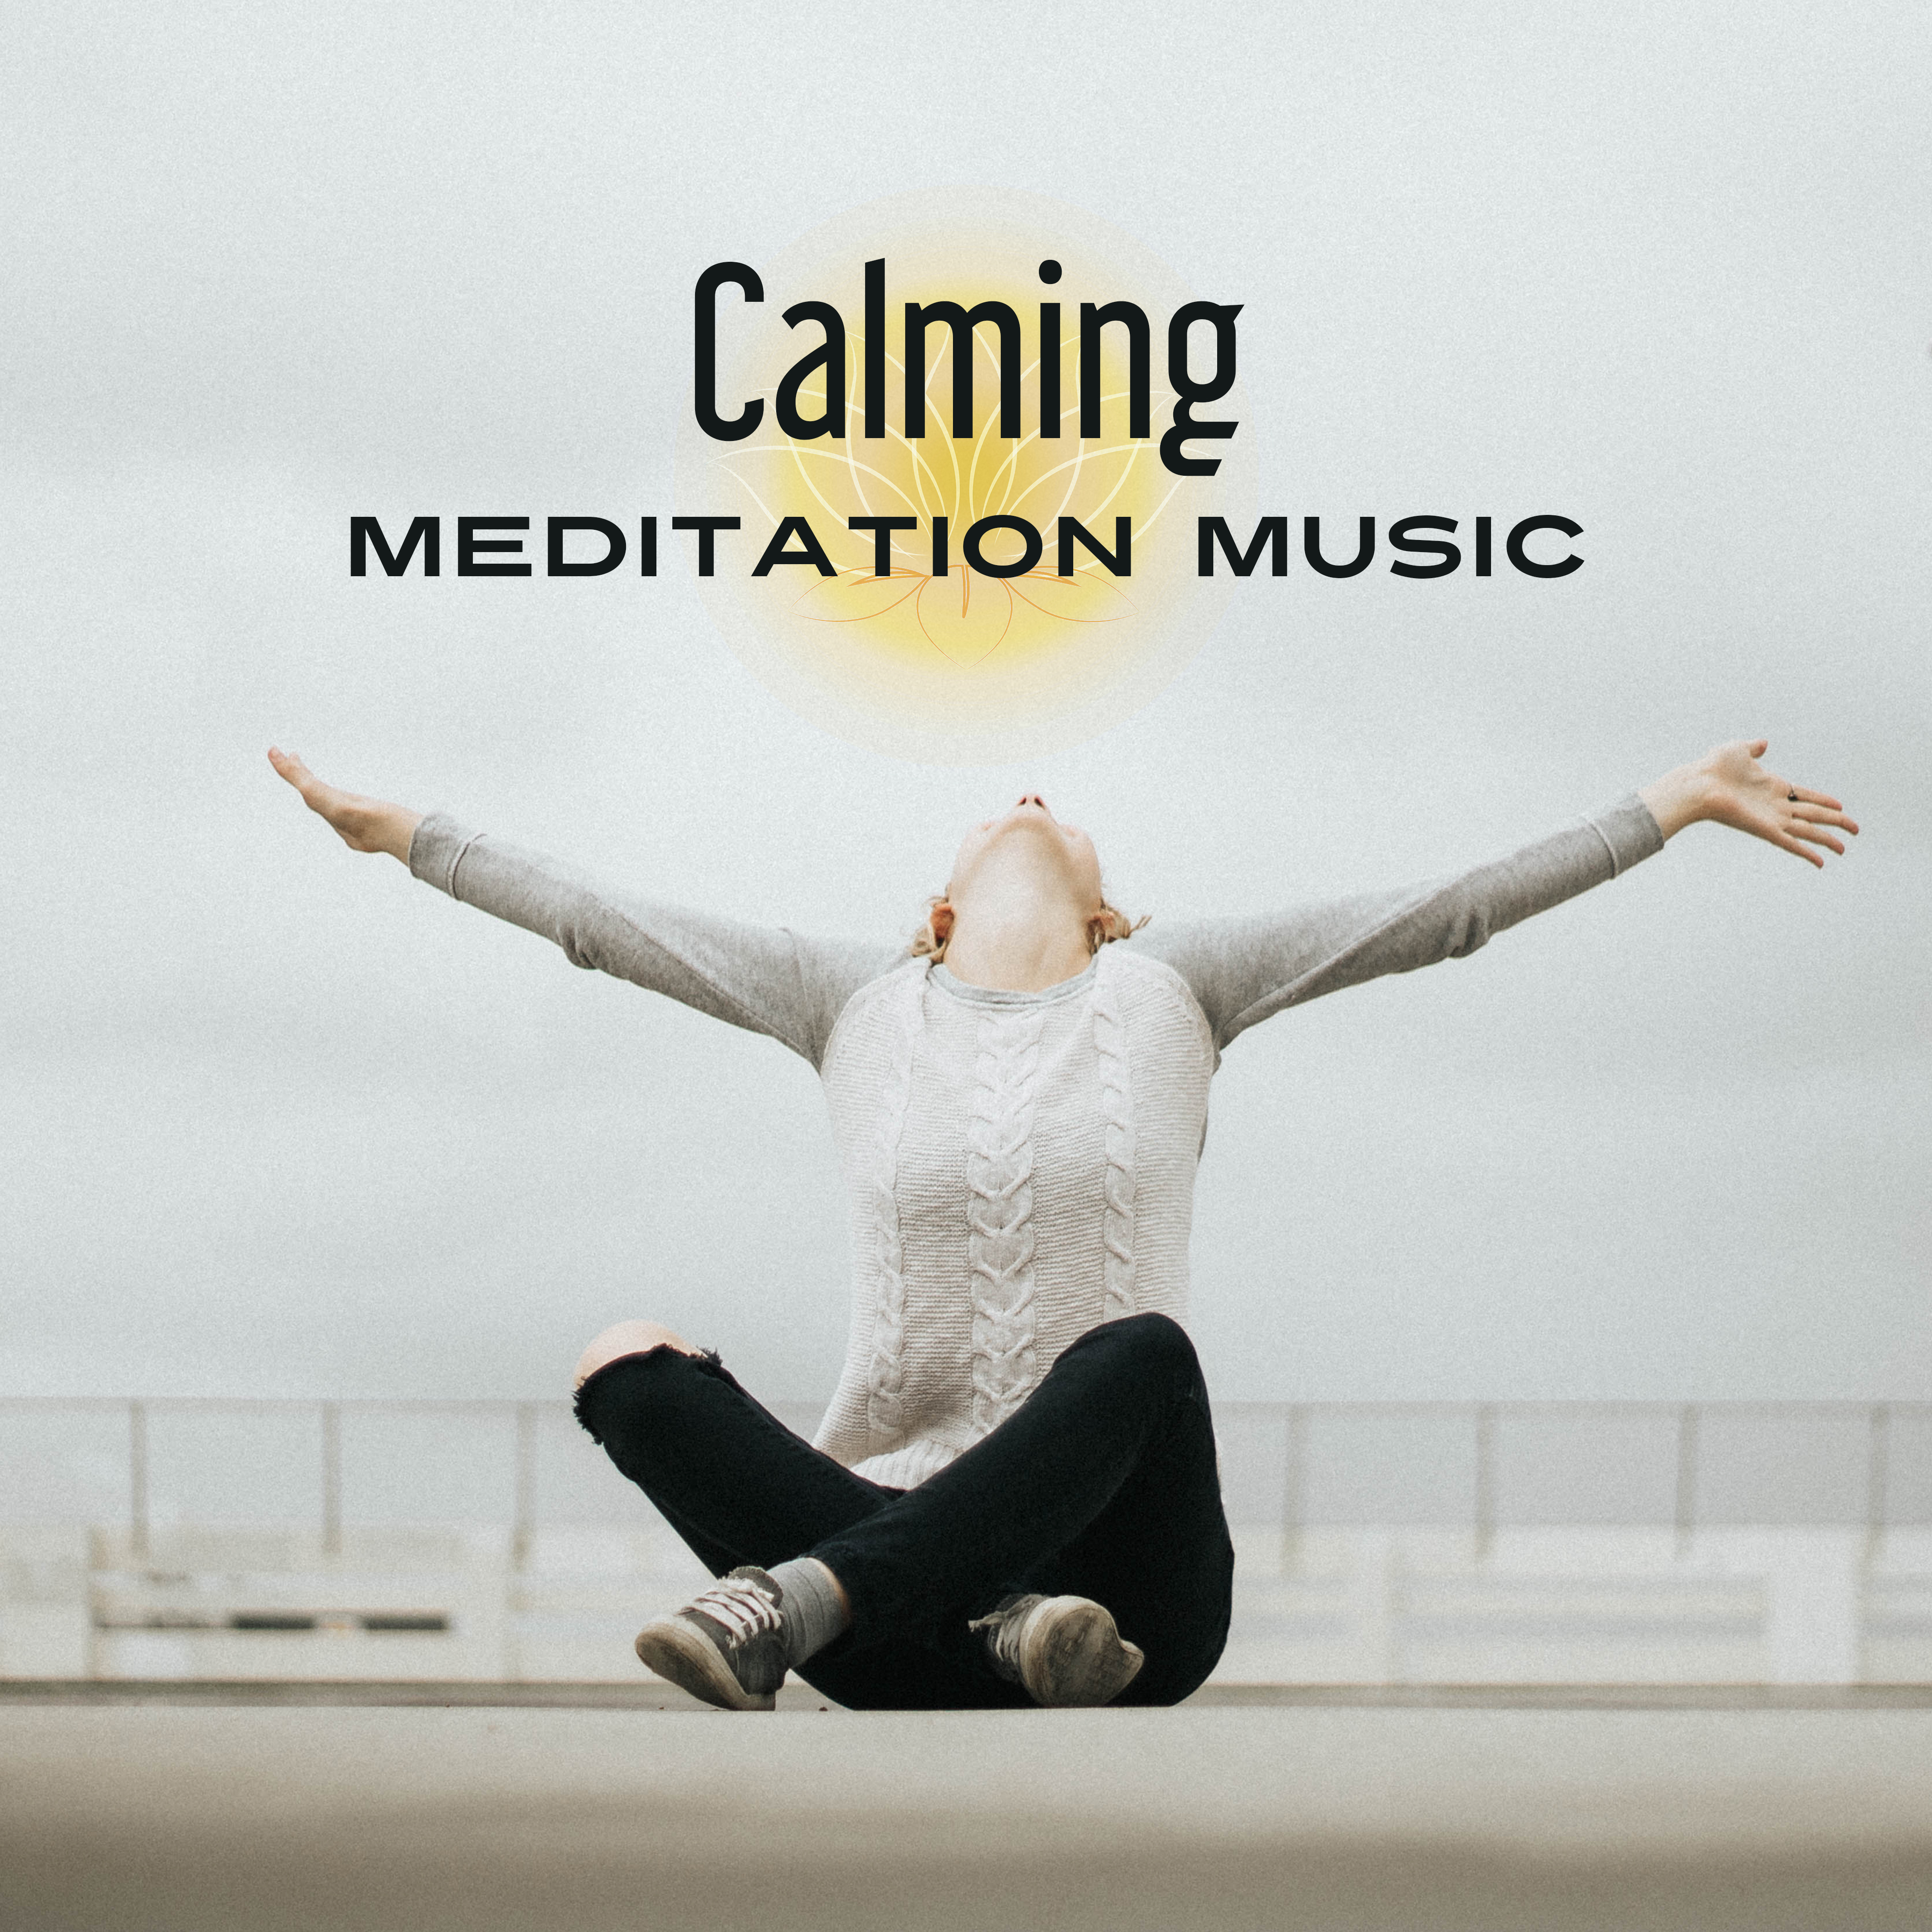 Calming Meditation Music – Soft New Age Music, Time to Meditate, Inner Peace, Mind Calmness